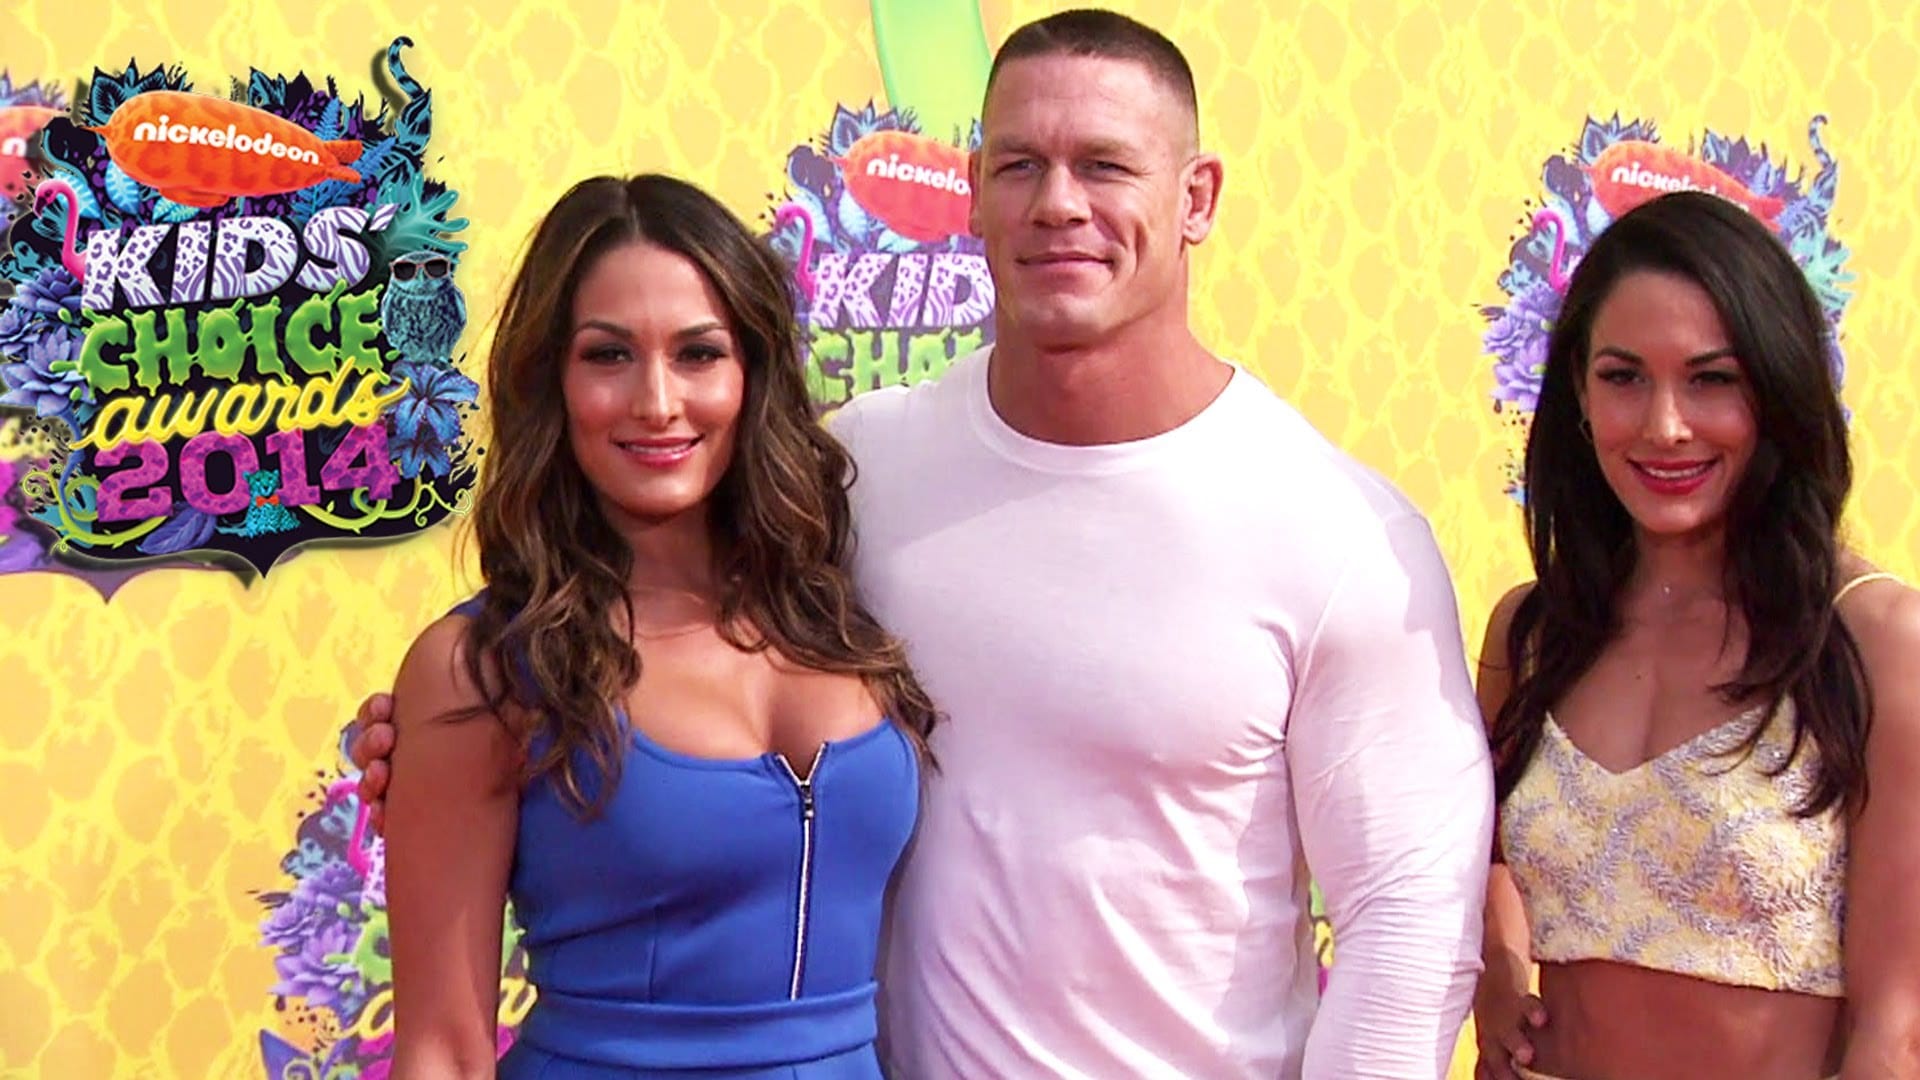 Brie Bella Sets The Record Straight On How She Feels About John Cena & Nikki Bella Break Up